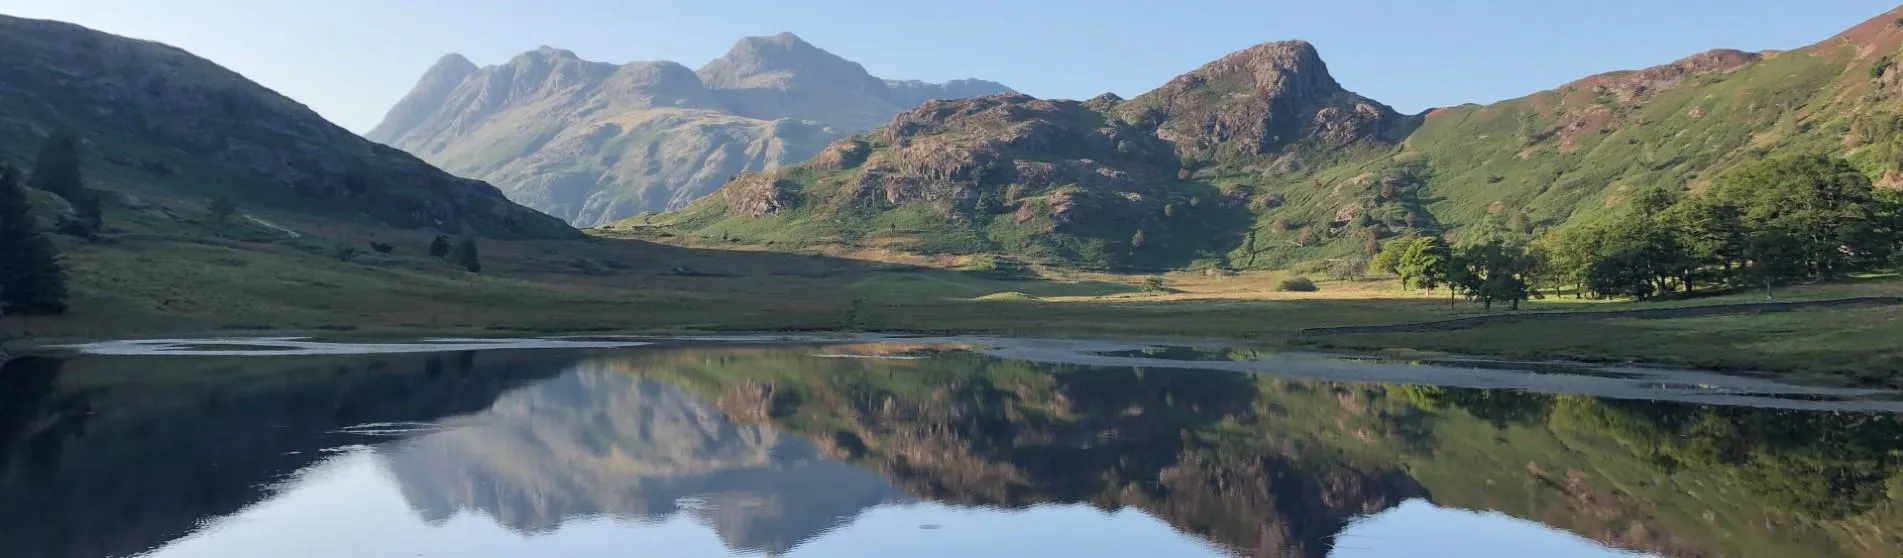 View of the Lake Blea Tarn, with mountains reflected in the water. Credit: Ellie Wood.